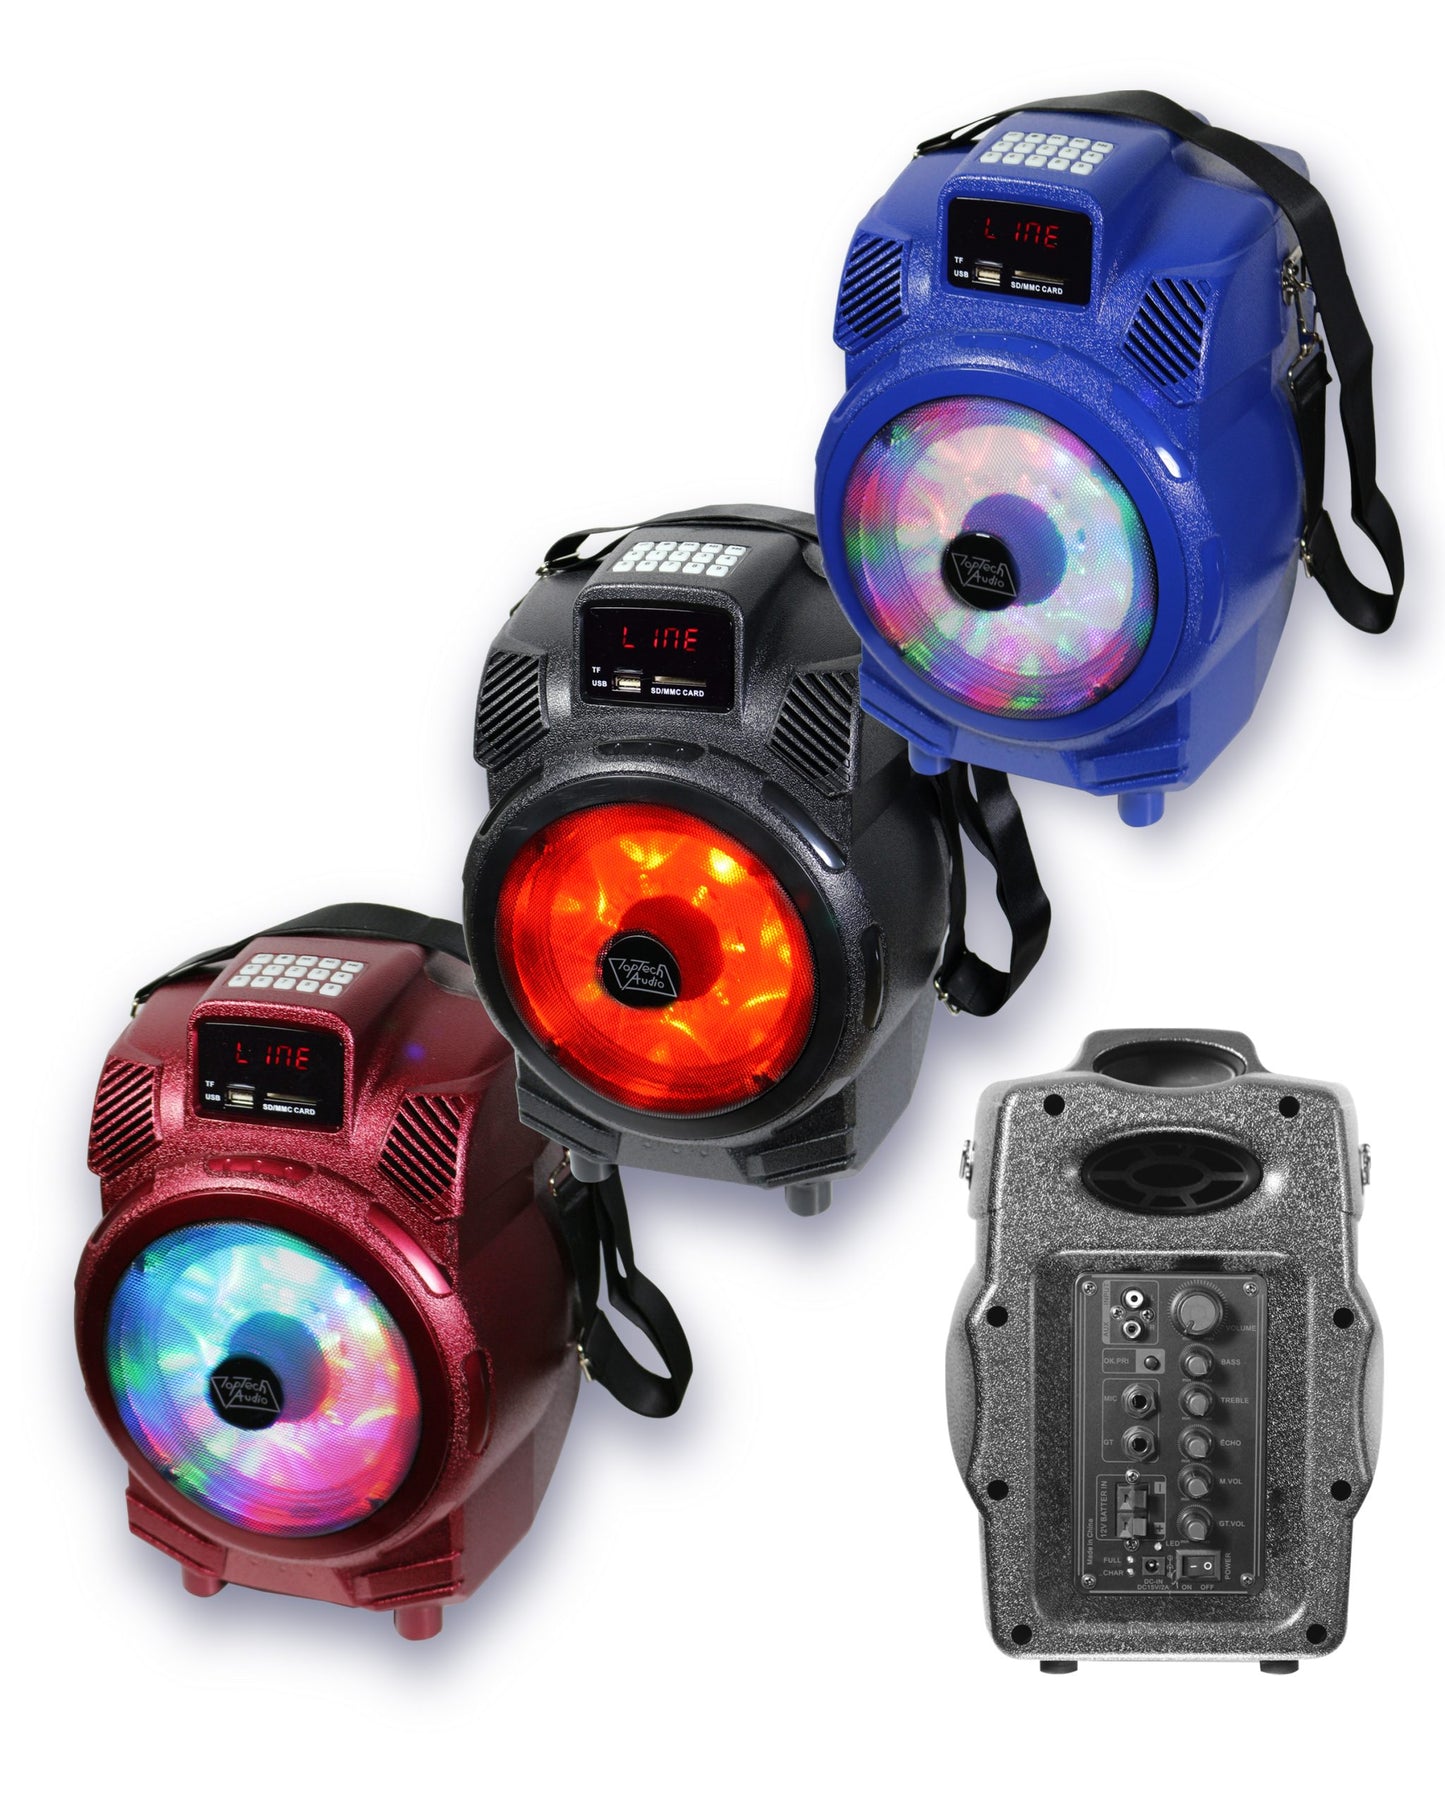 Fully Amplified Portable 1200 Watts Peak Power 6.5” Speaker with led light